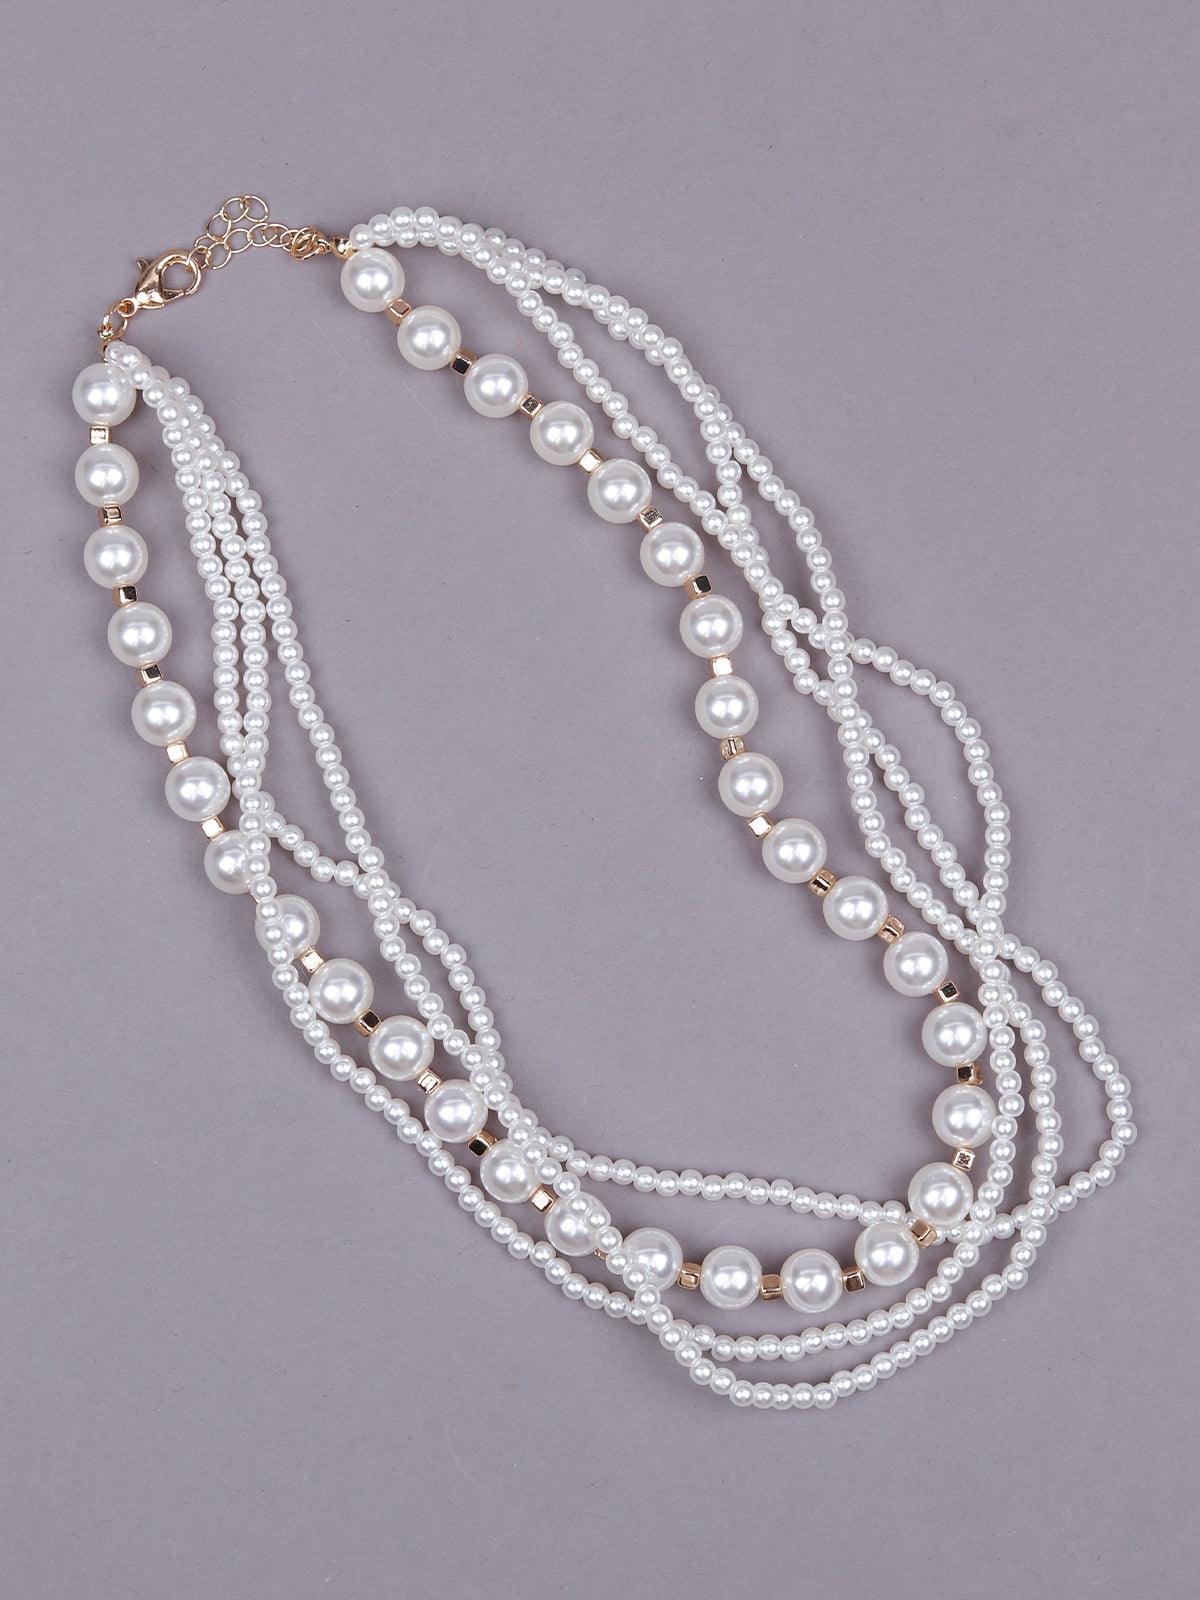 Women's Gorgeous Multilayered Faux Pearl Statement Necklace - Odette